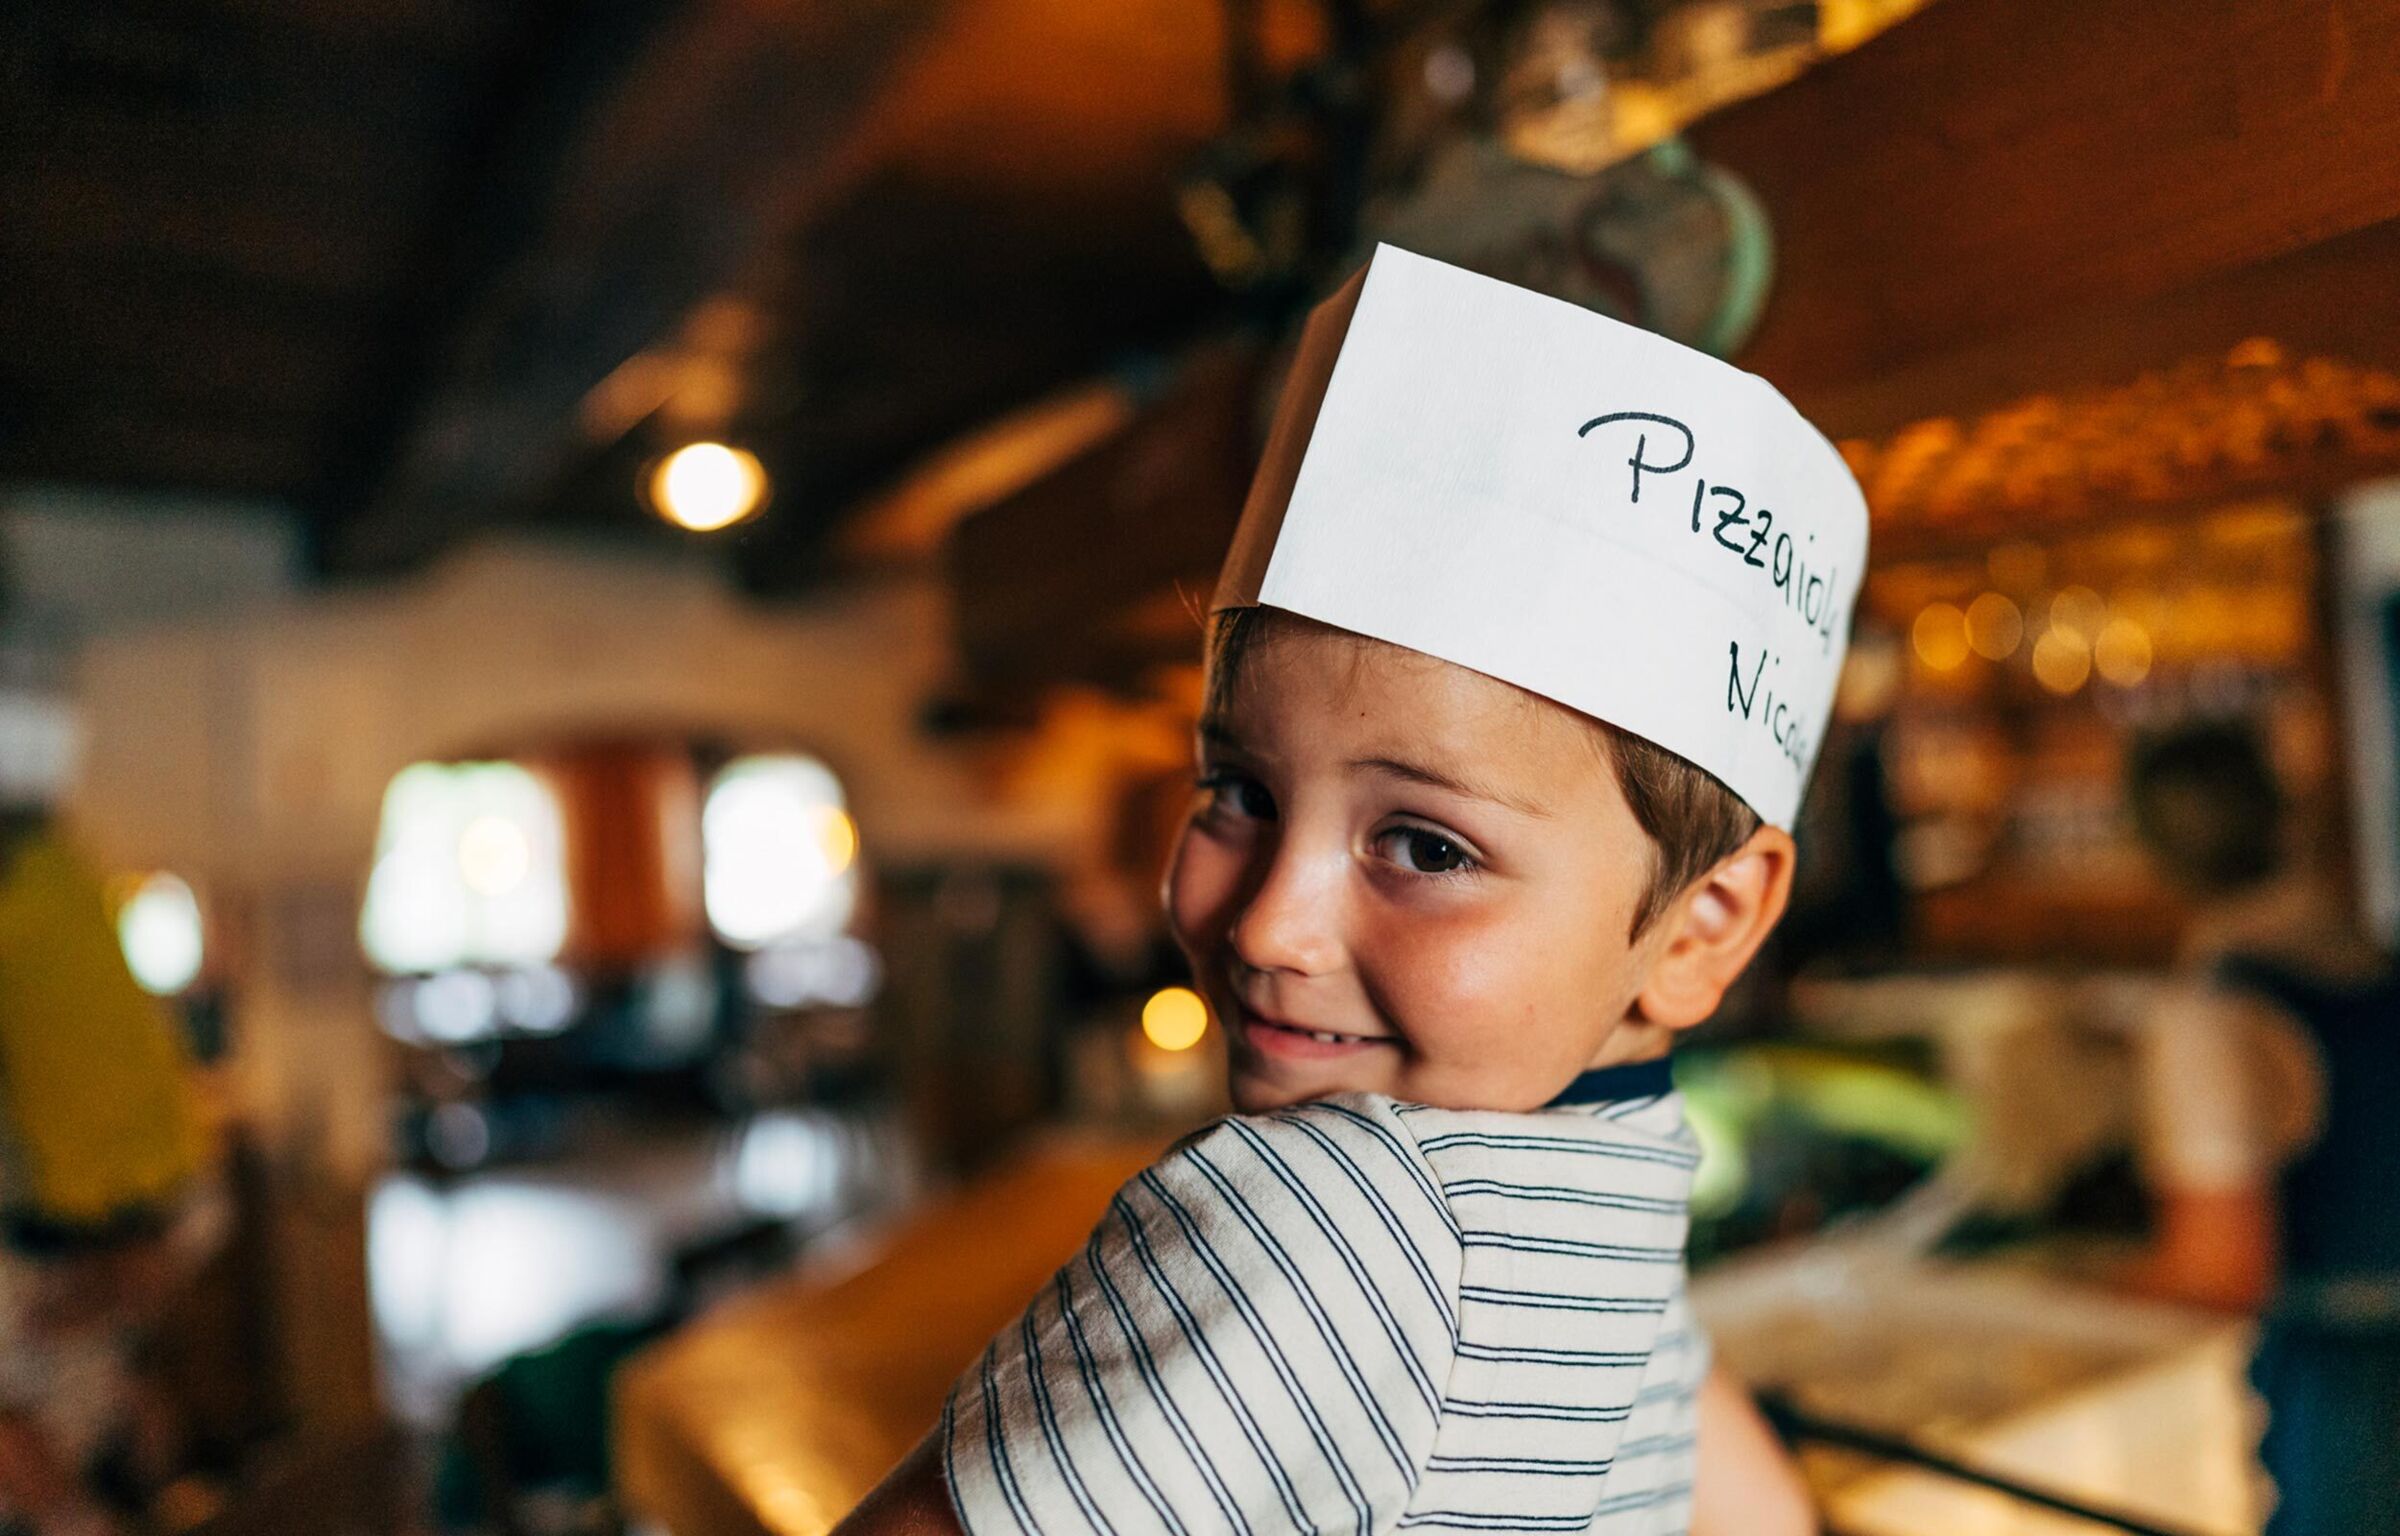 Child has a chef's hat on that says pizza baking class and smiles at the camera.